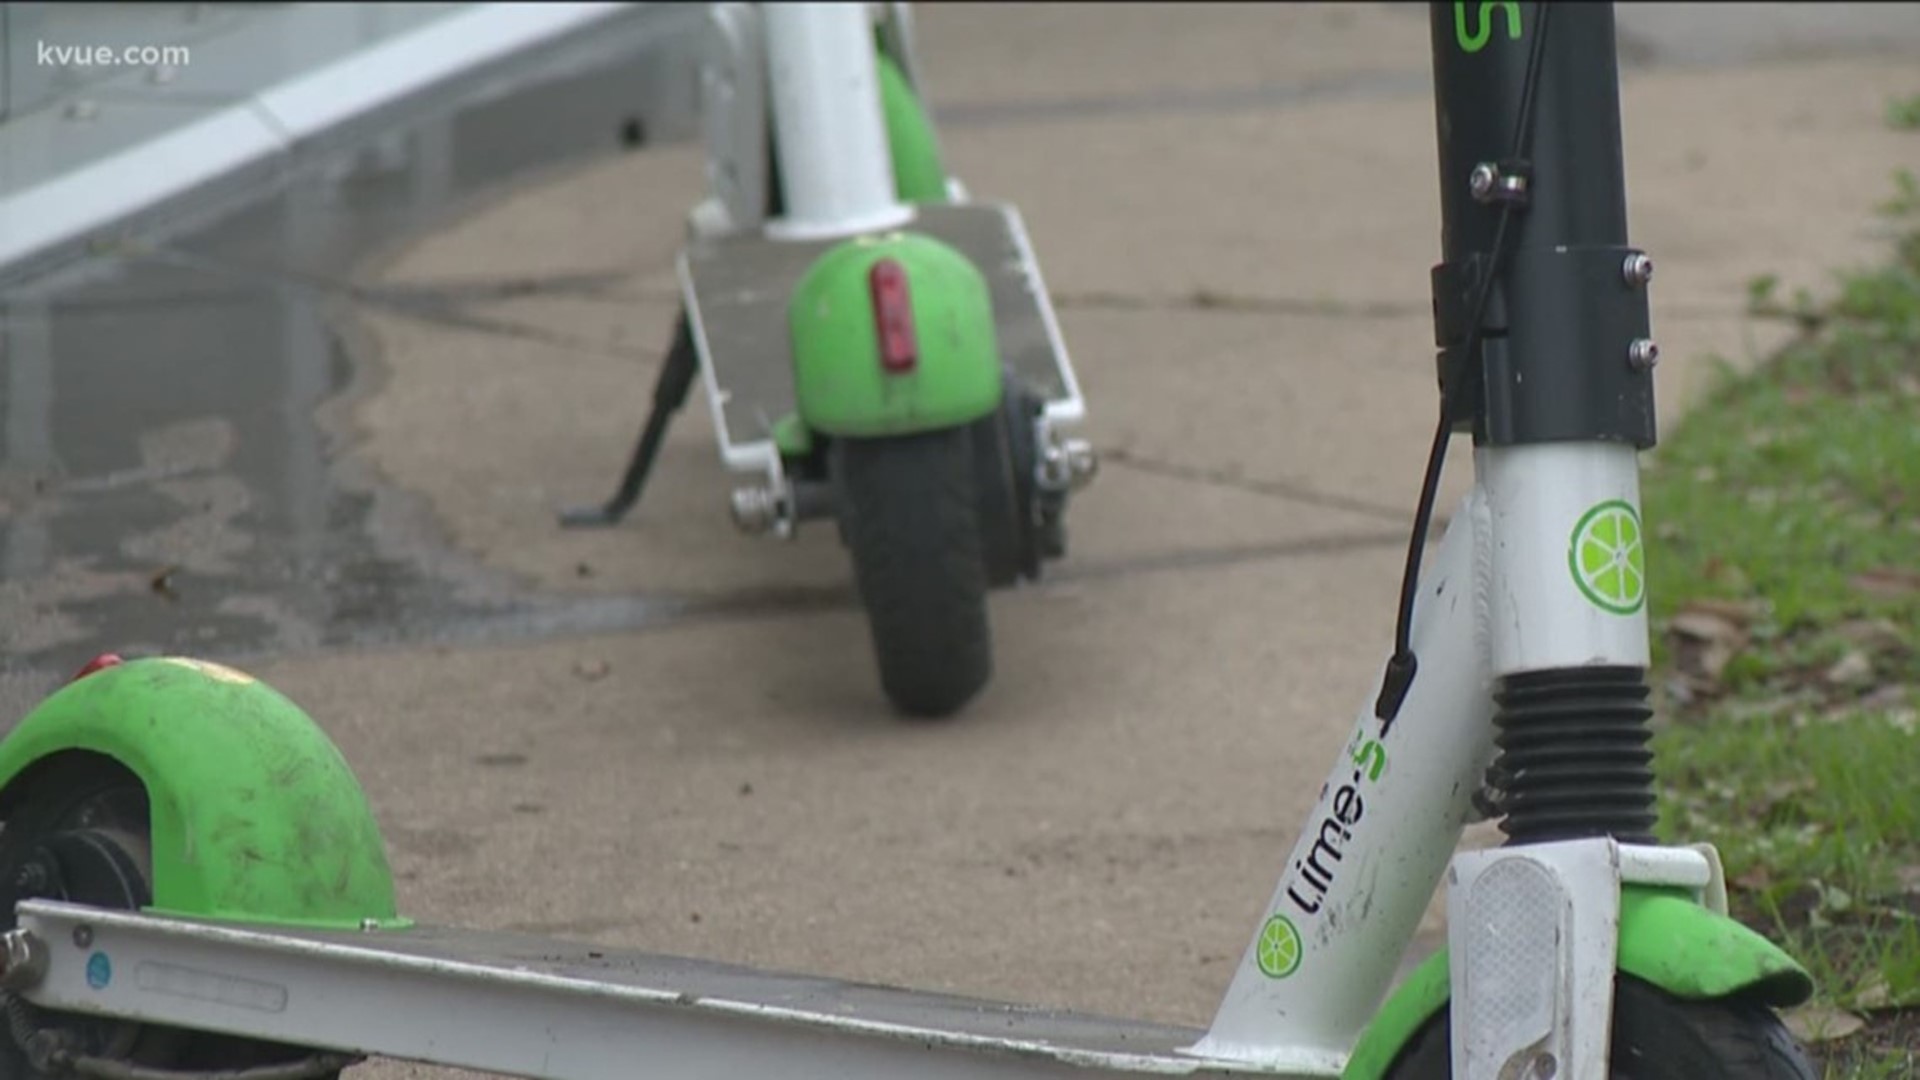 A man says he was riding a Lime scooter when it stopped unexpectedly and threw him off.